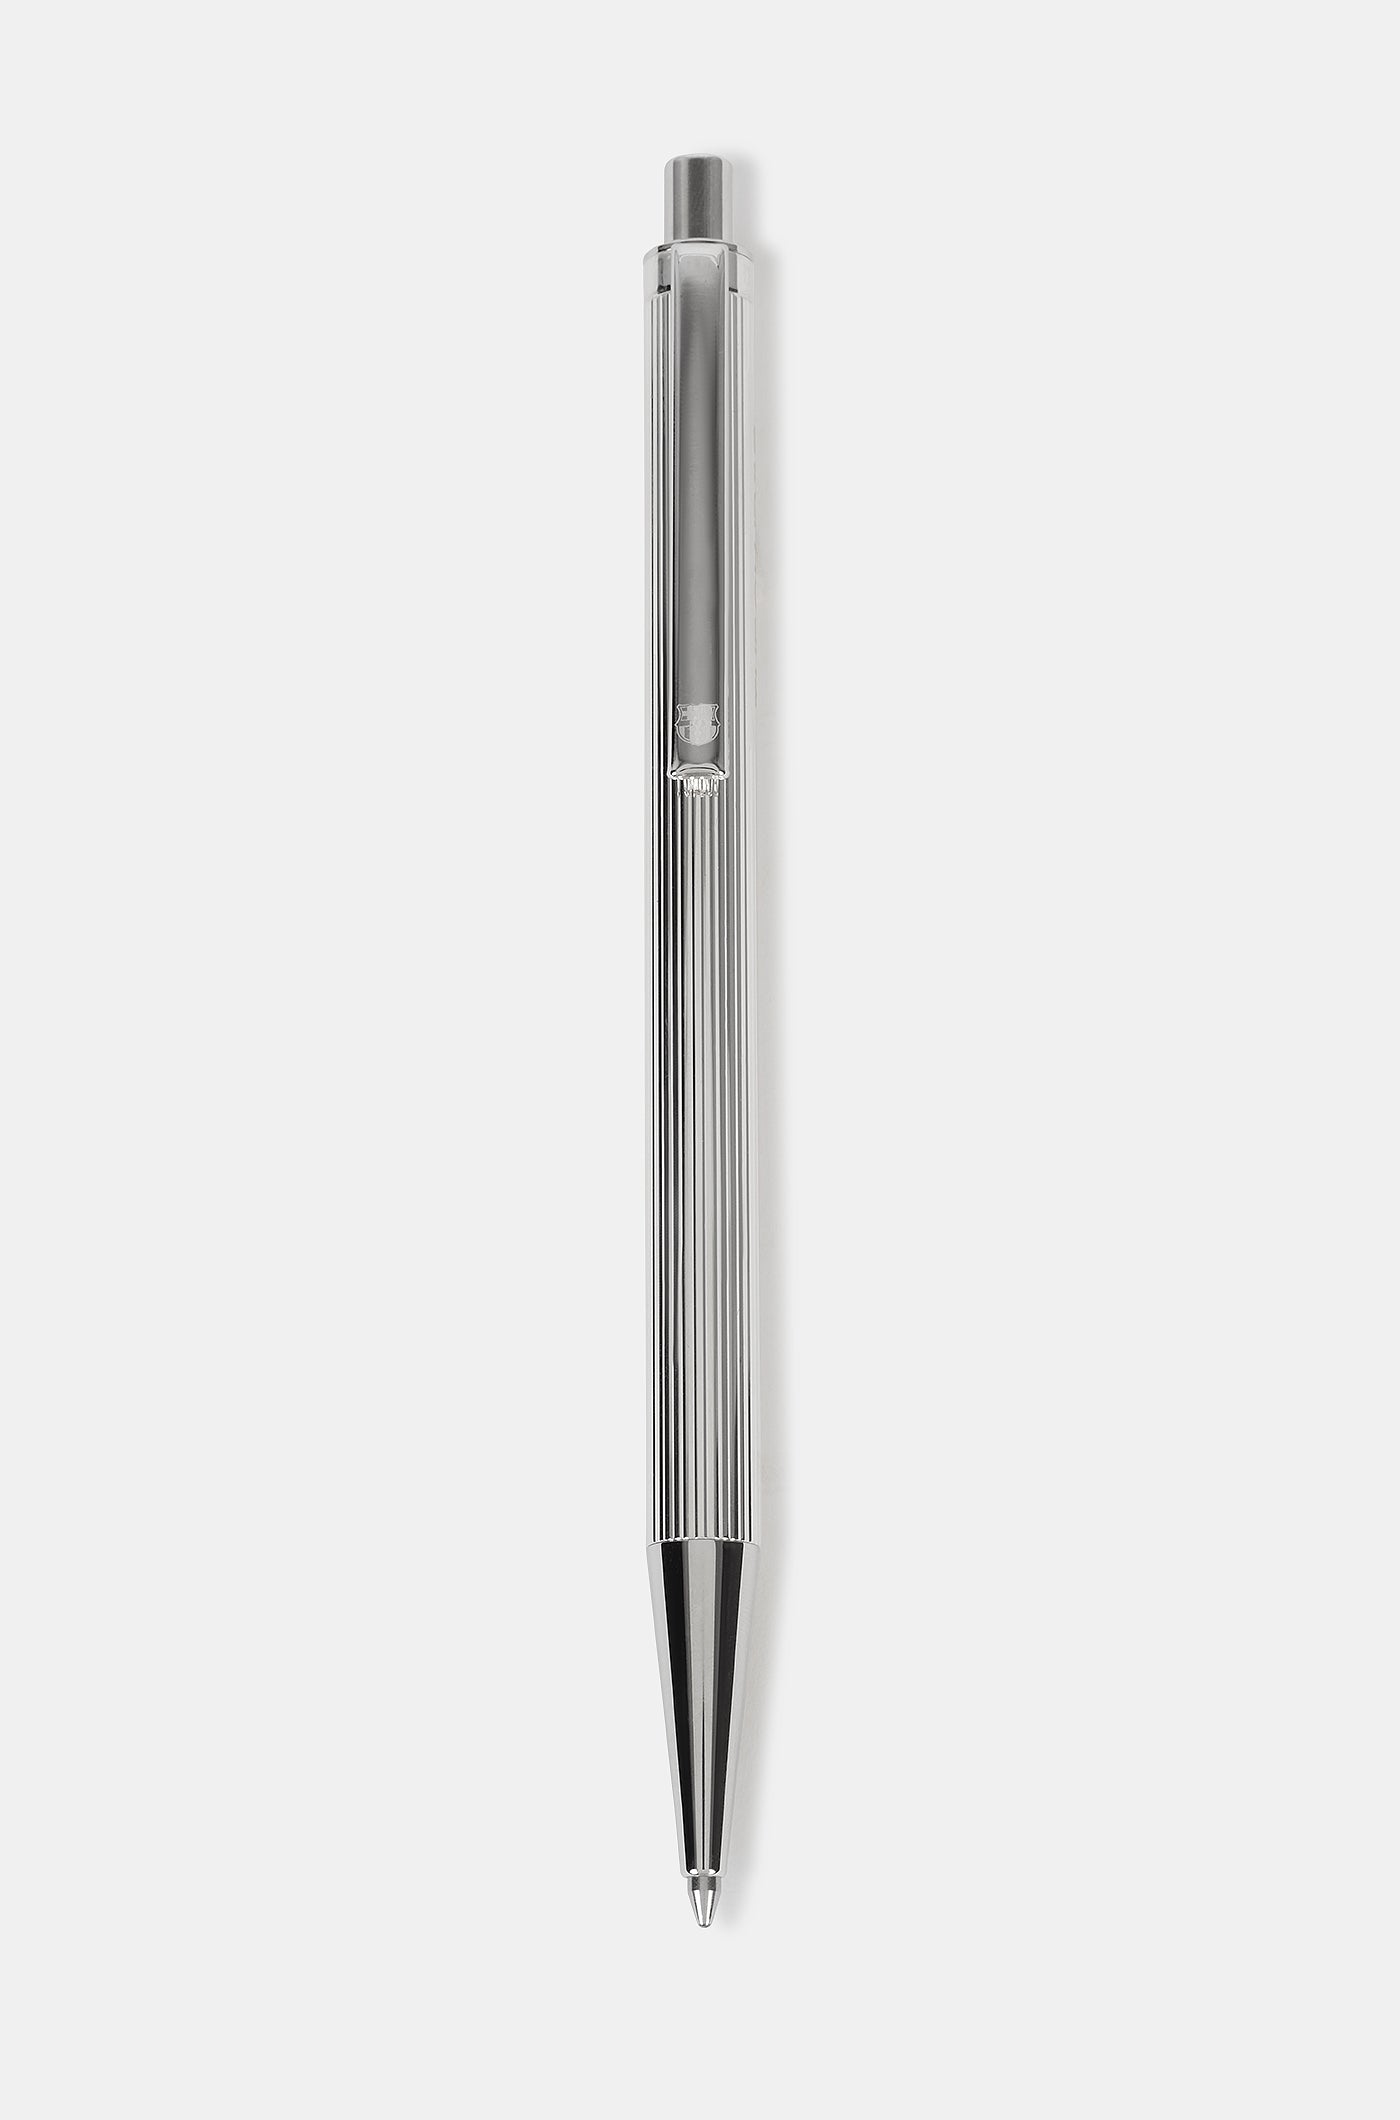 The Club sterling silver pen